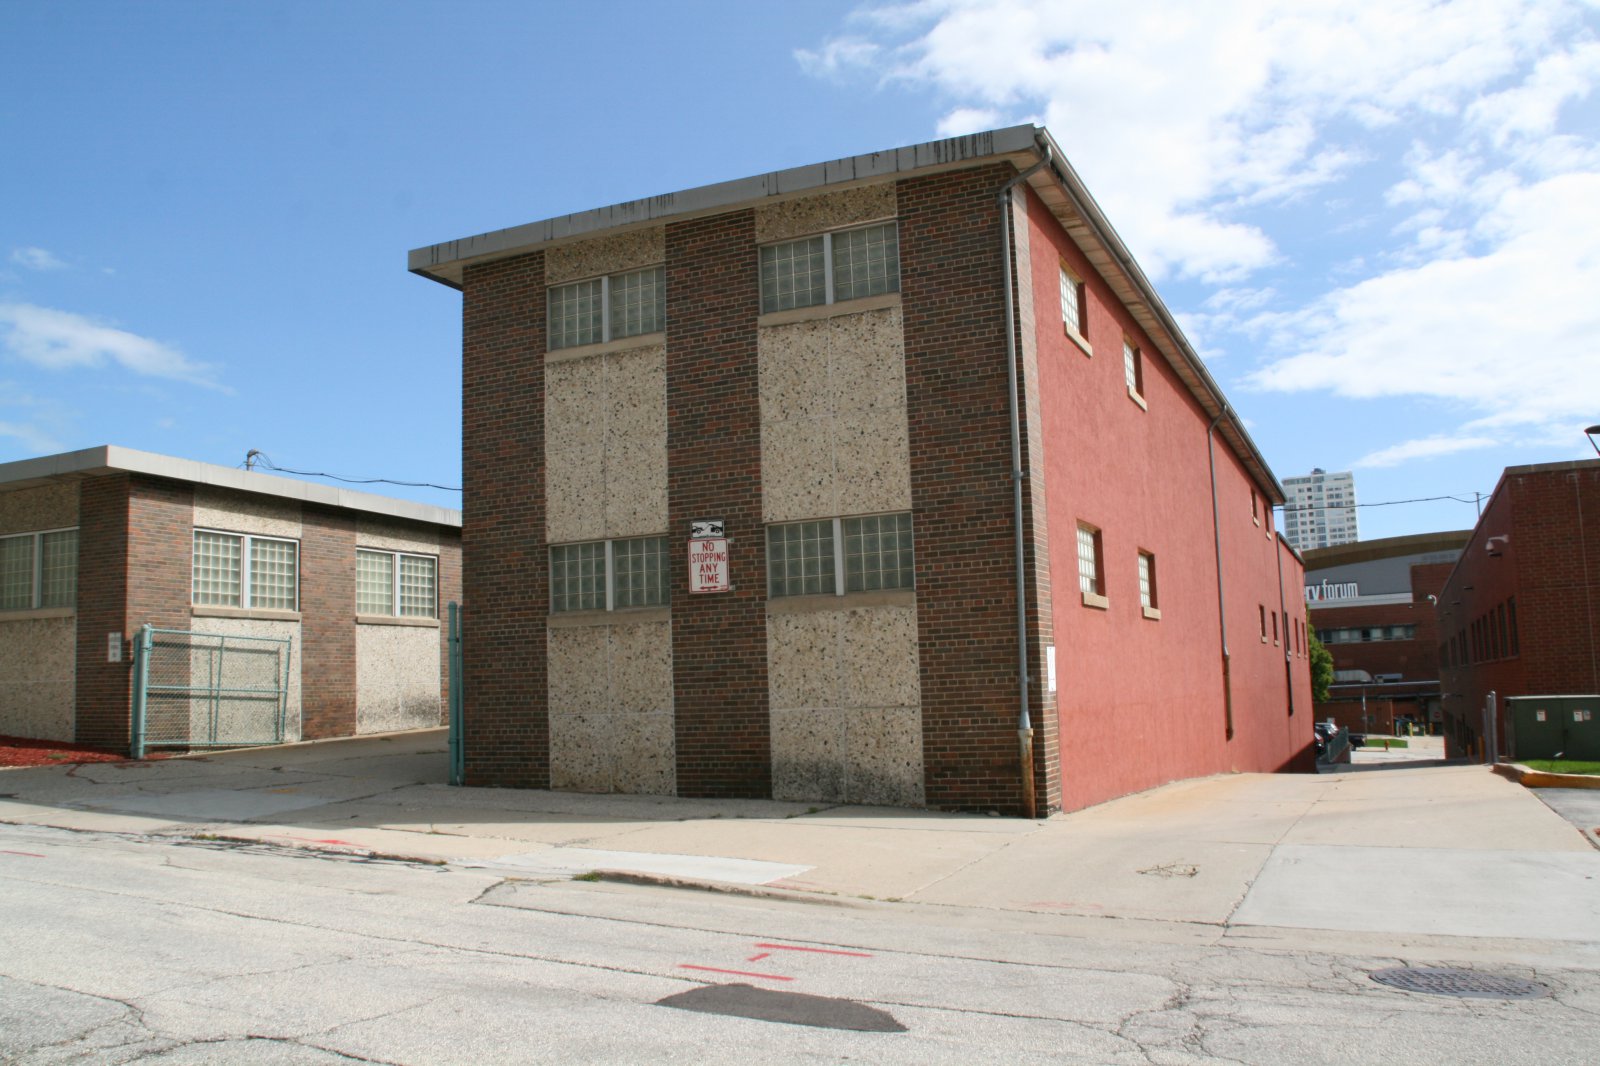 Rear Building at 739 W. Juneau Ave.